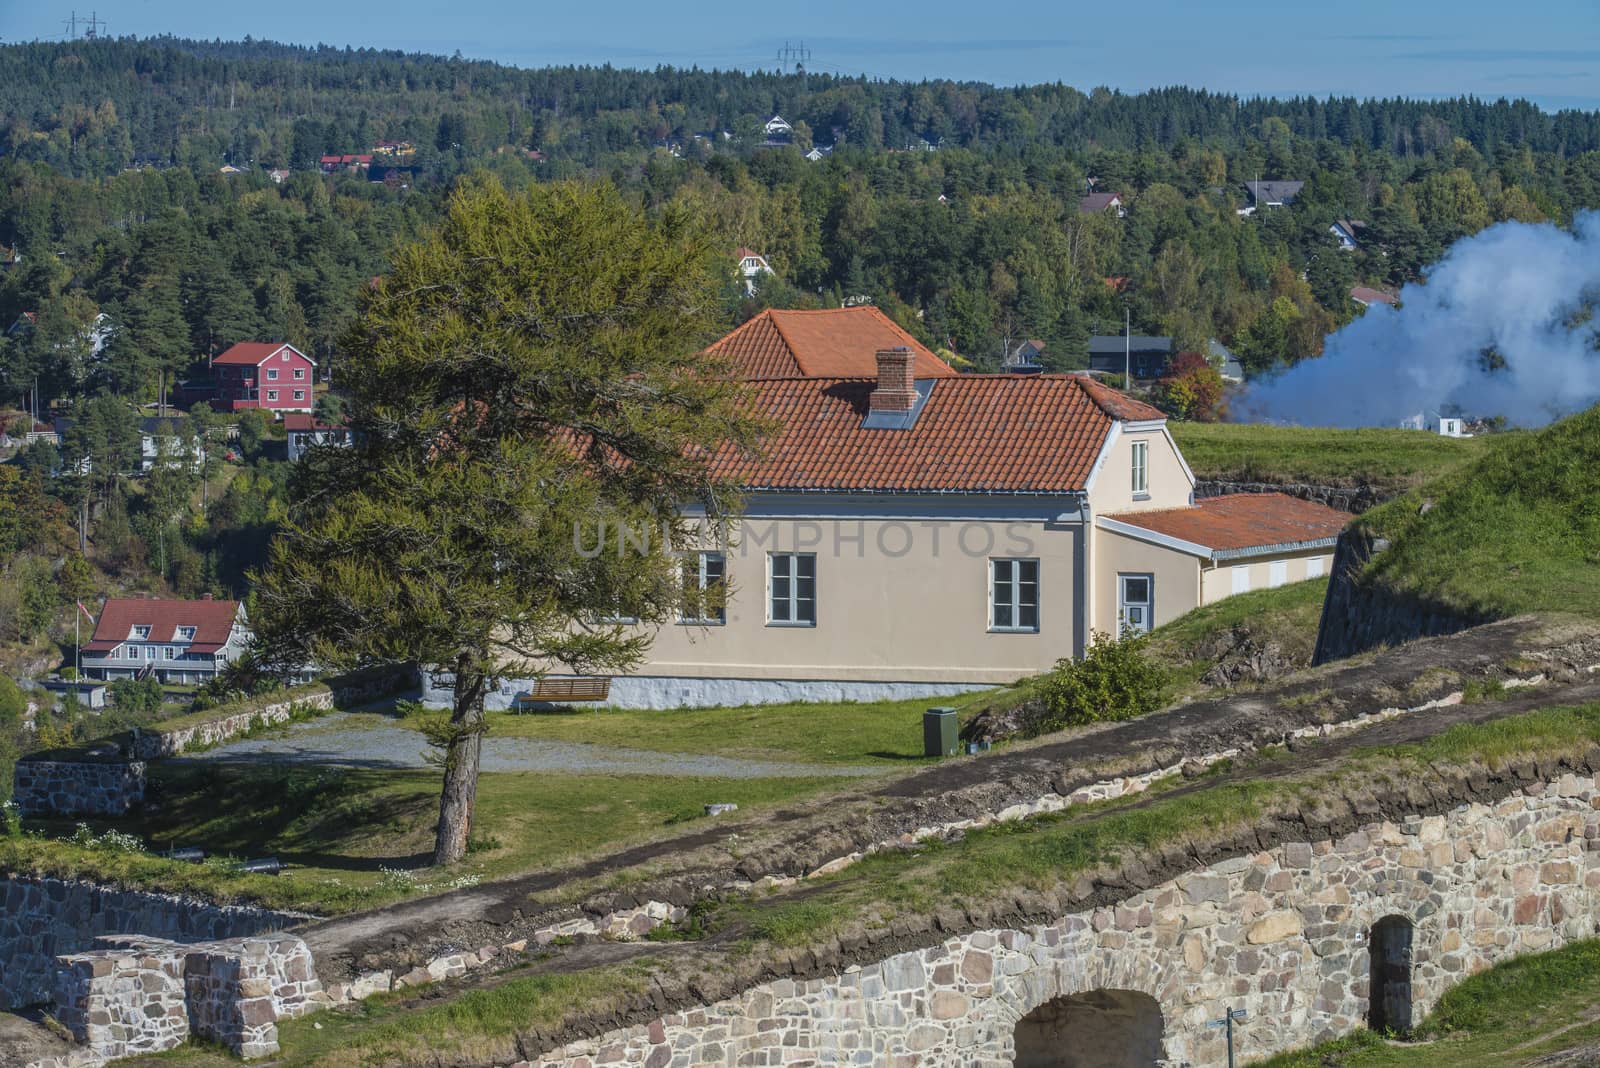 Laboratory building is located on Huths battery and built in 1828. The image is shot at Fredriksten fortress in Halden, Norway September 2013.